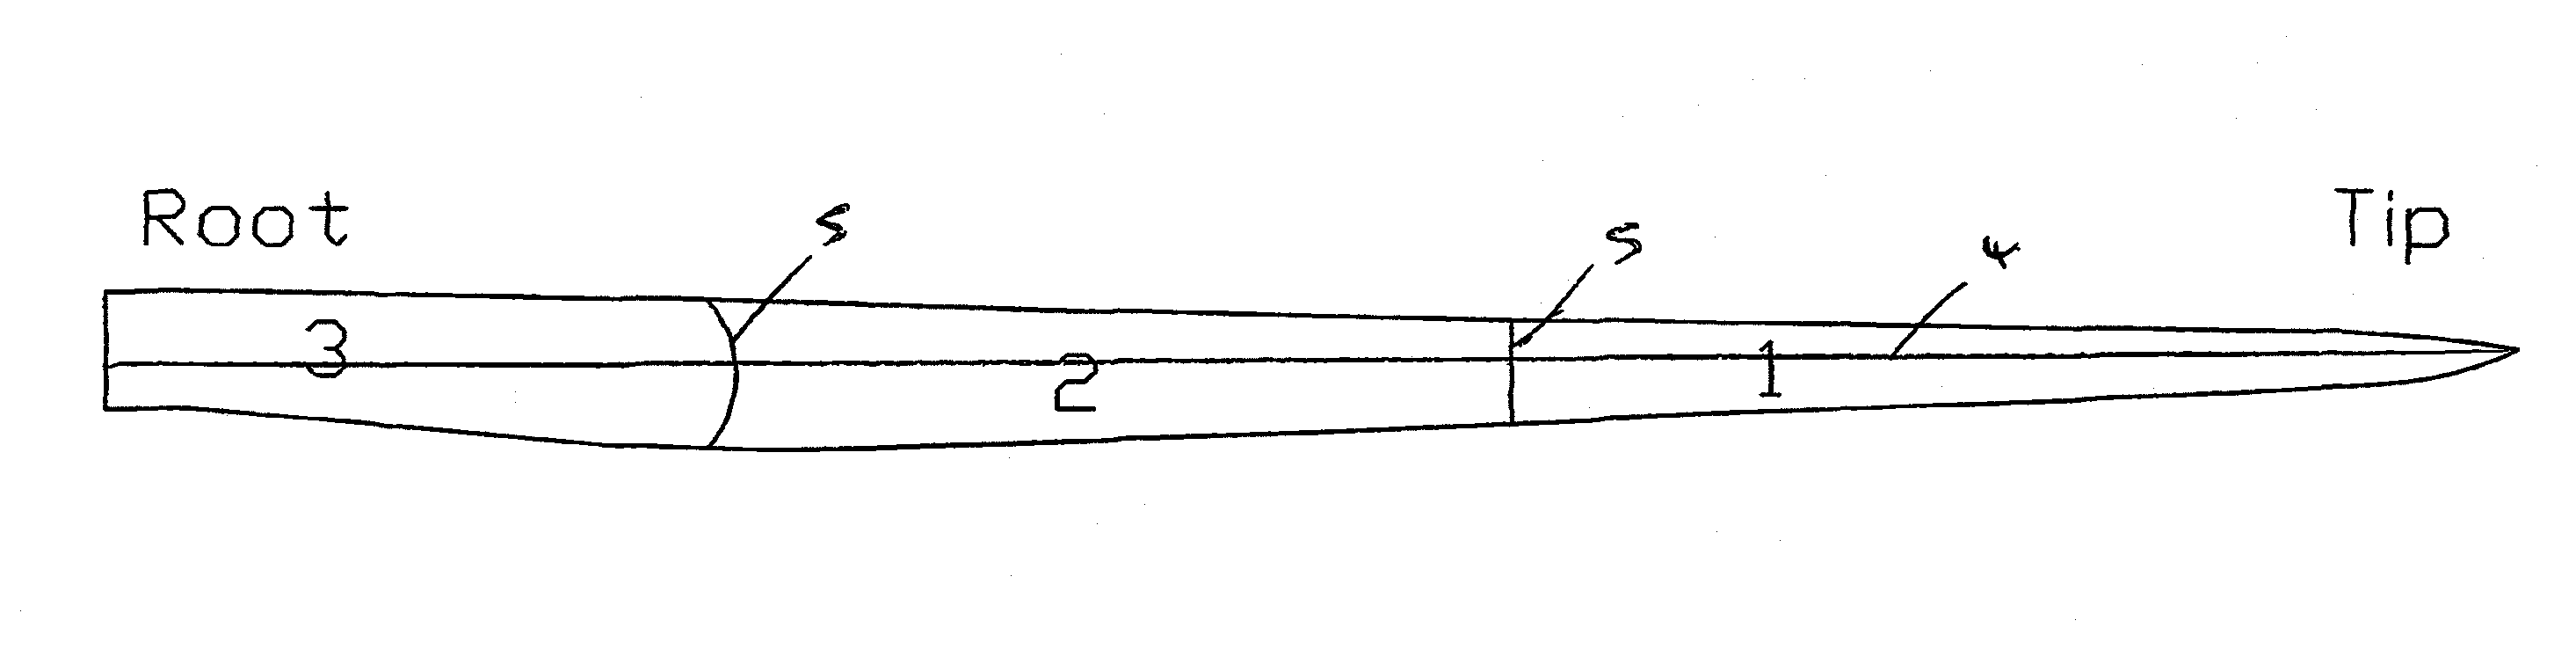 Blade for a turbine operating in water